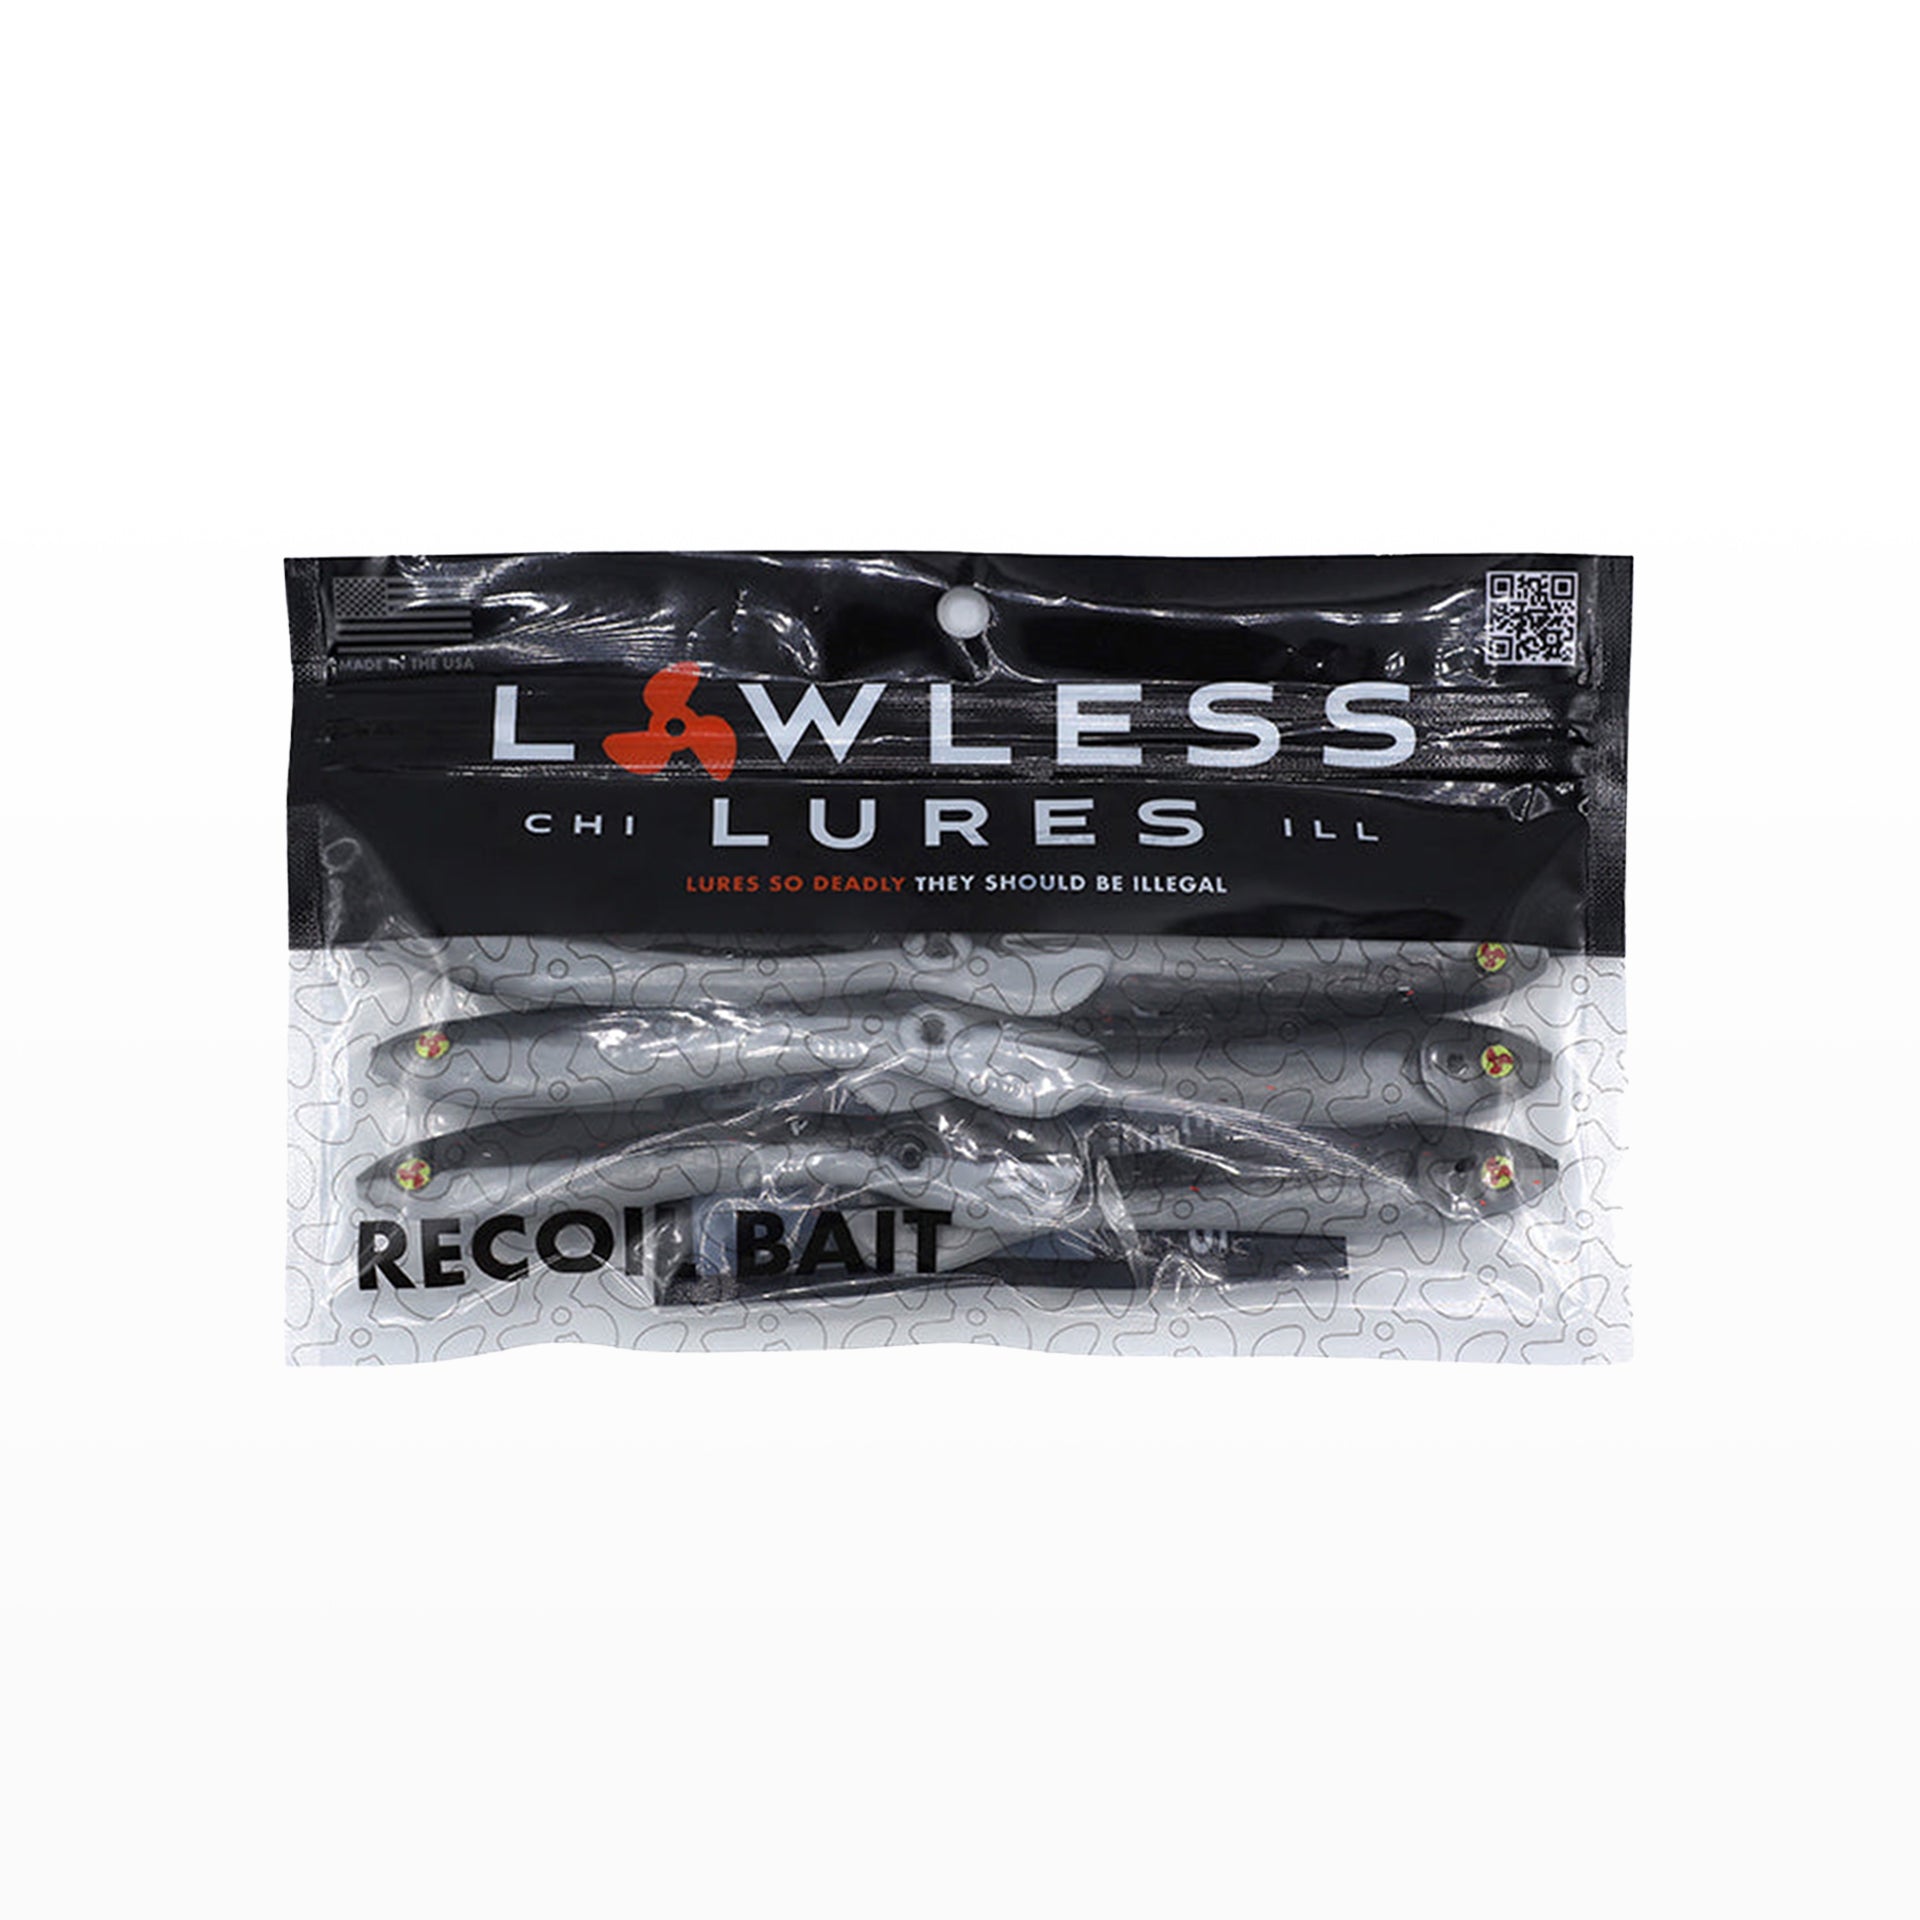 Outlaw (Shad) - 3.25 Lawless Lures 9 Pc Recoil Bait Set